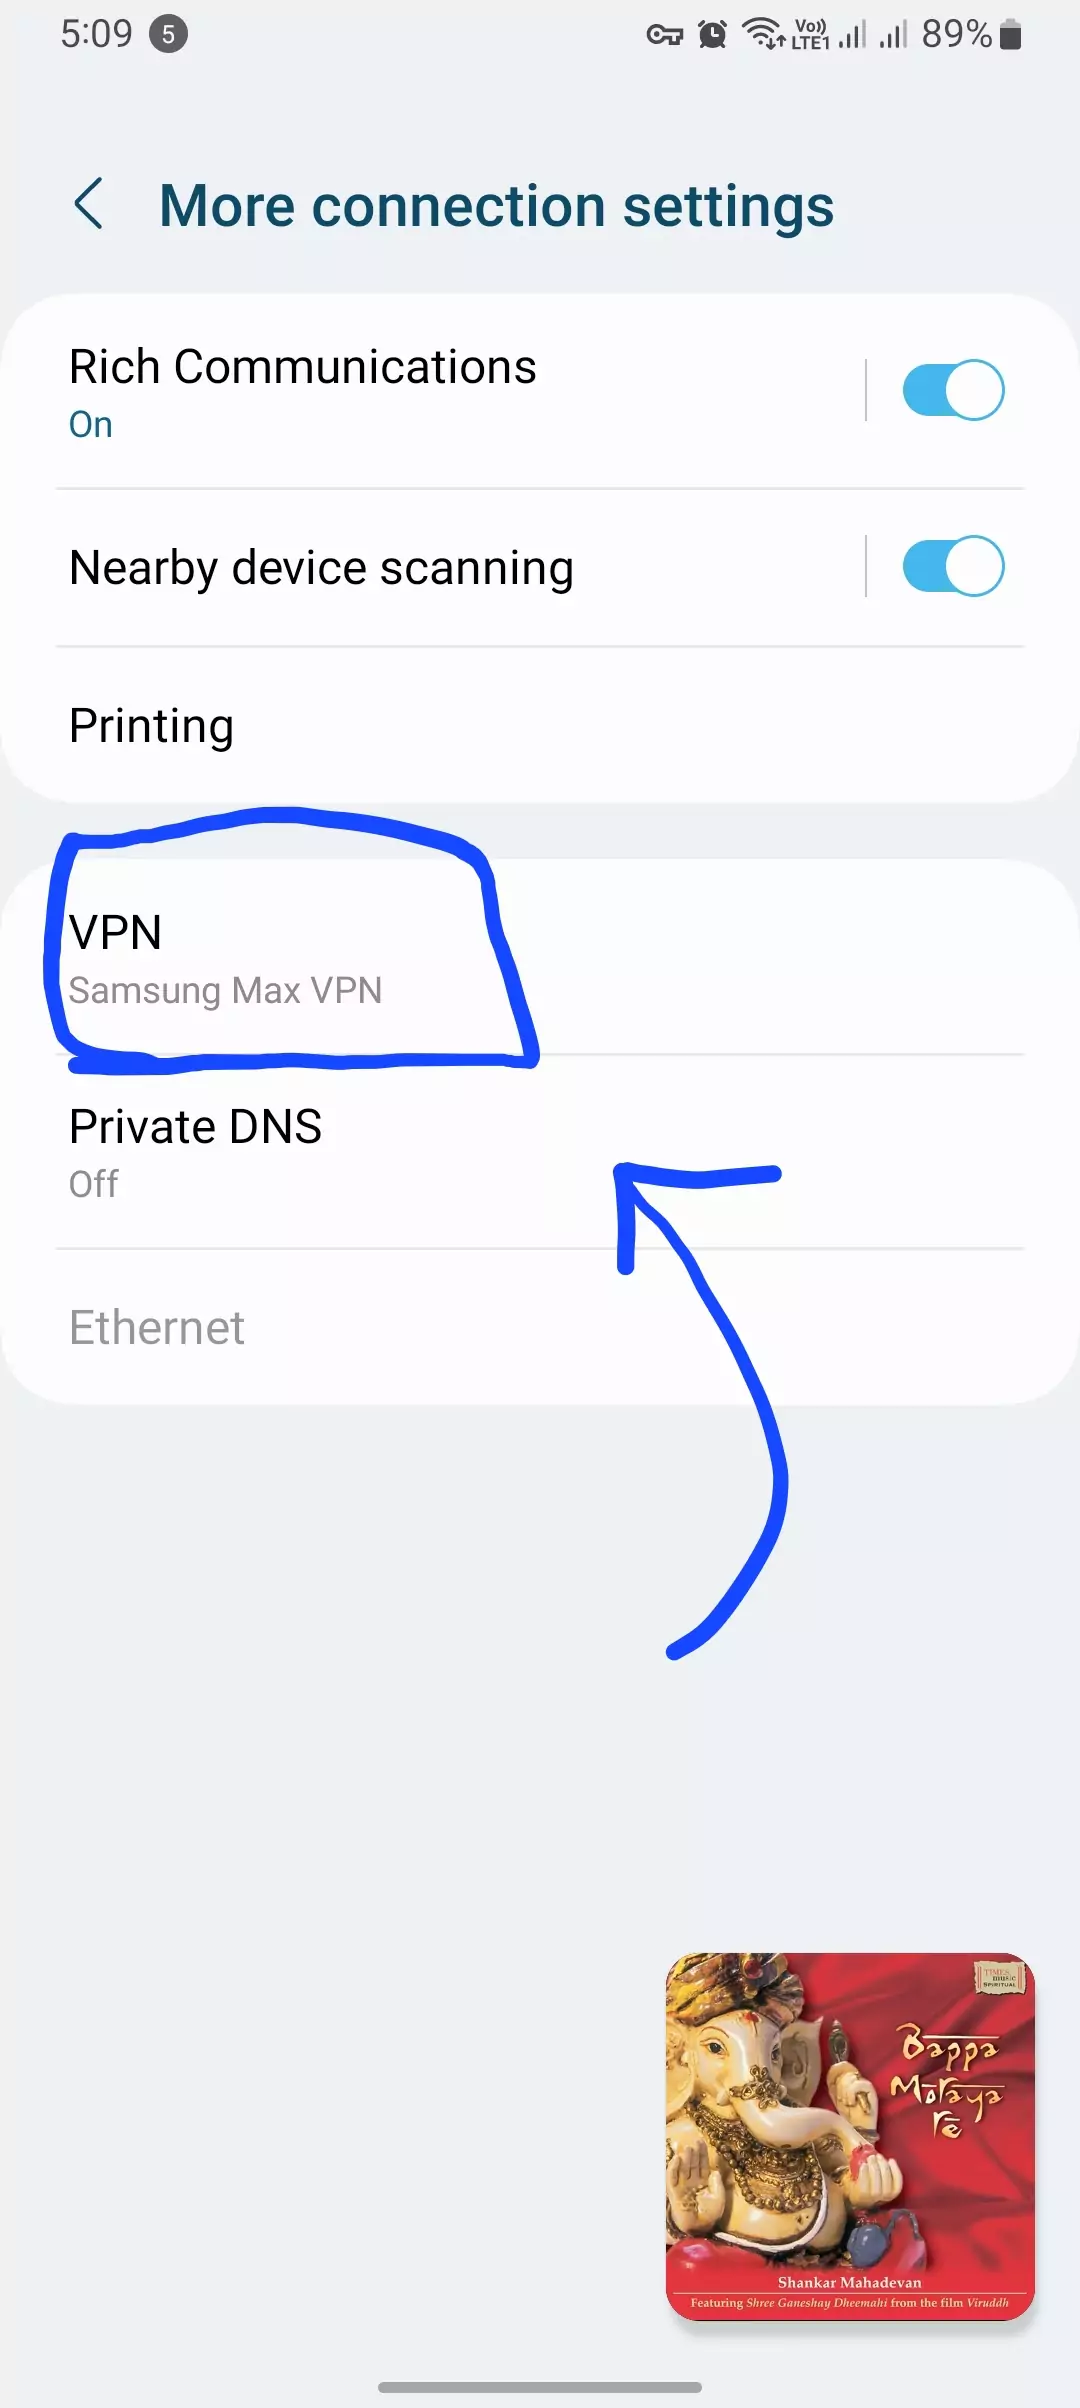 vpn highlighted in more connection settings